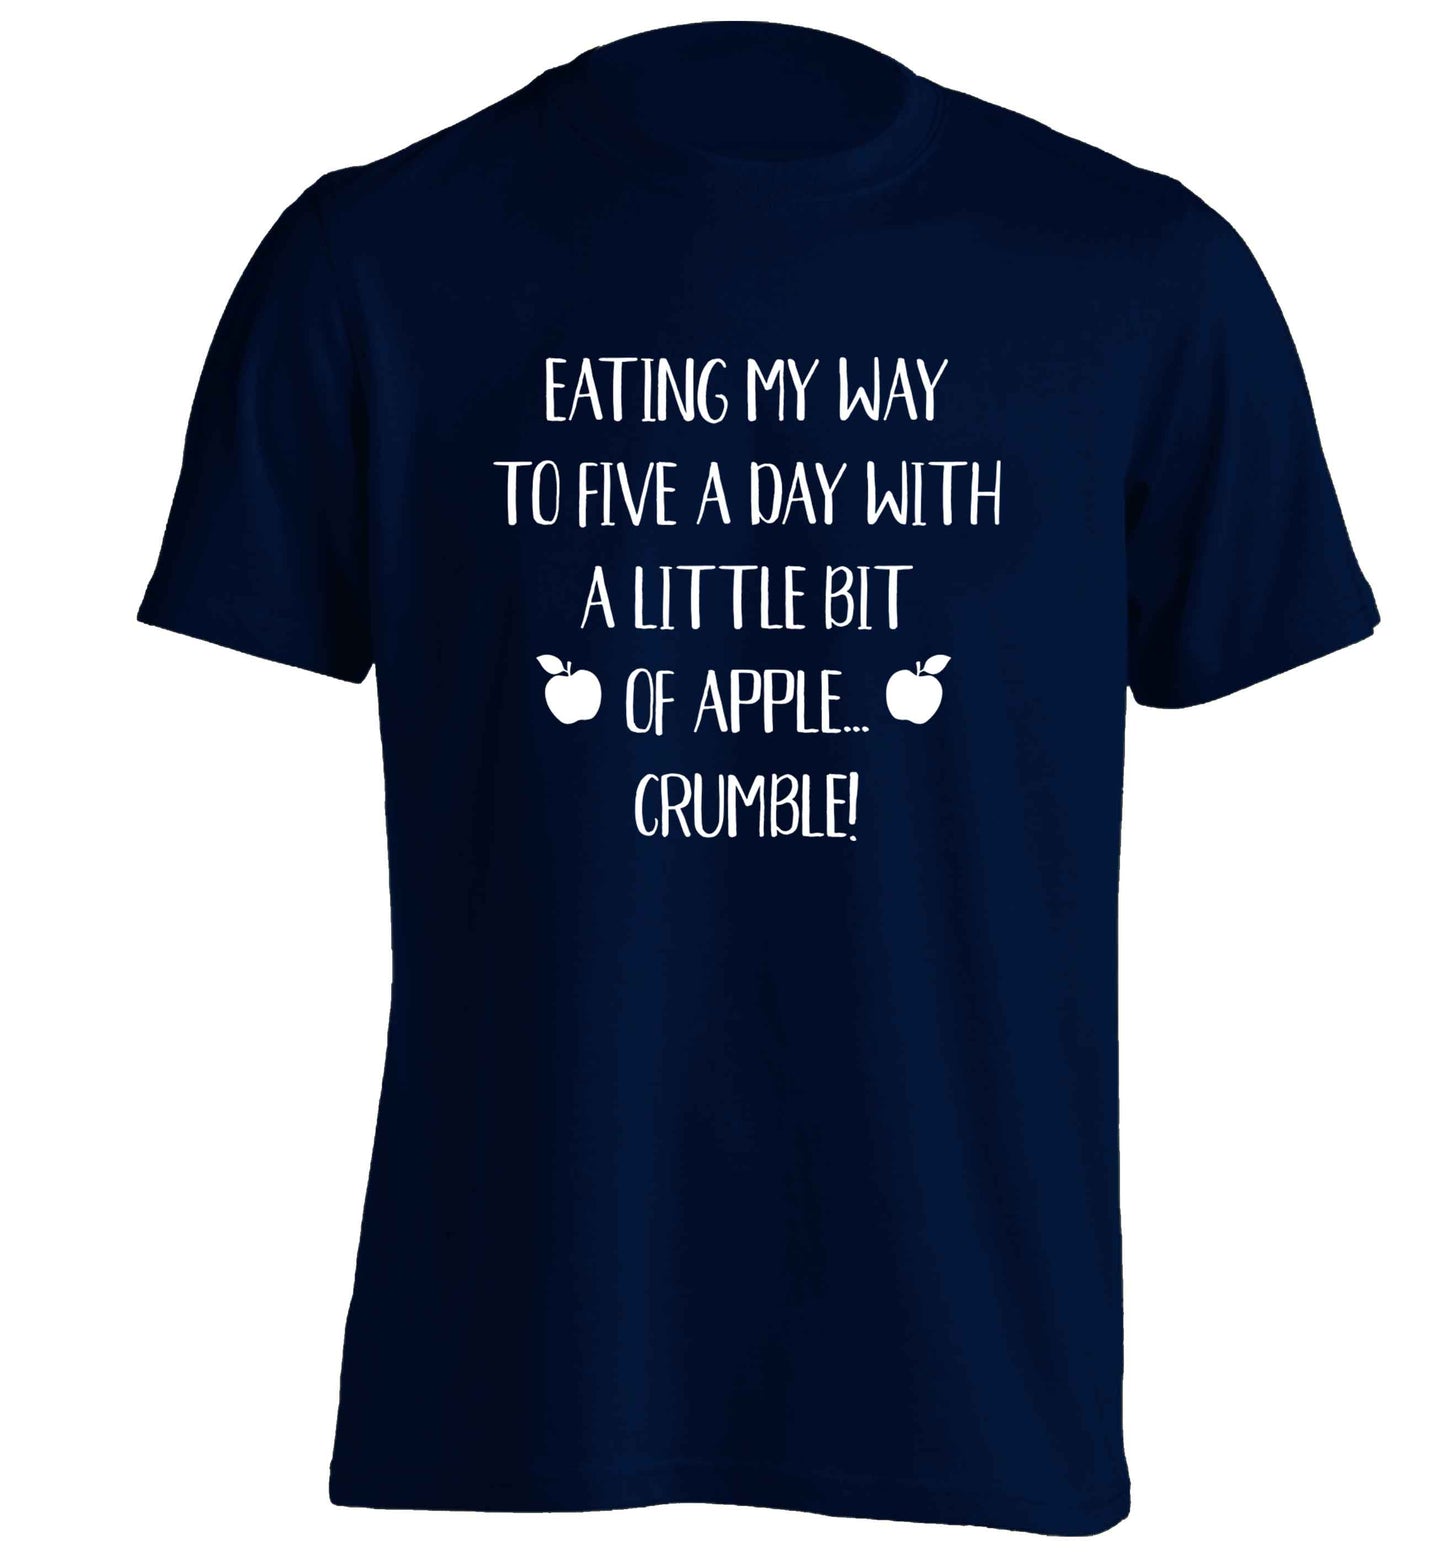 Eating my way to five a day with a little bit of apple crumble adults unisex navy Tshirt 2XL